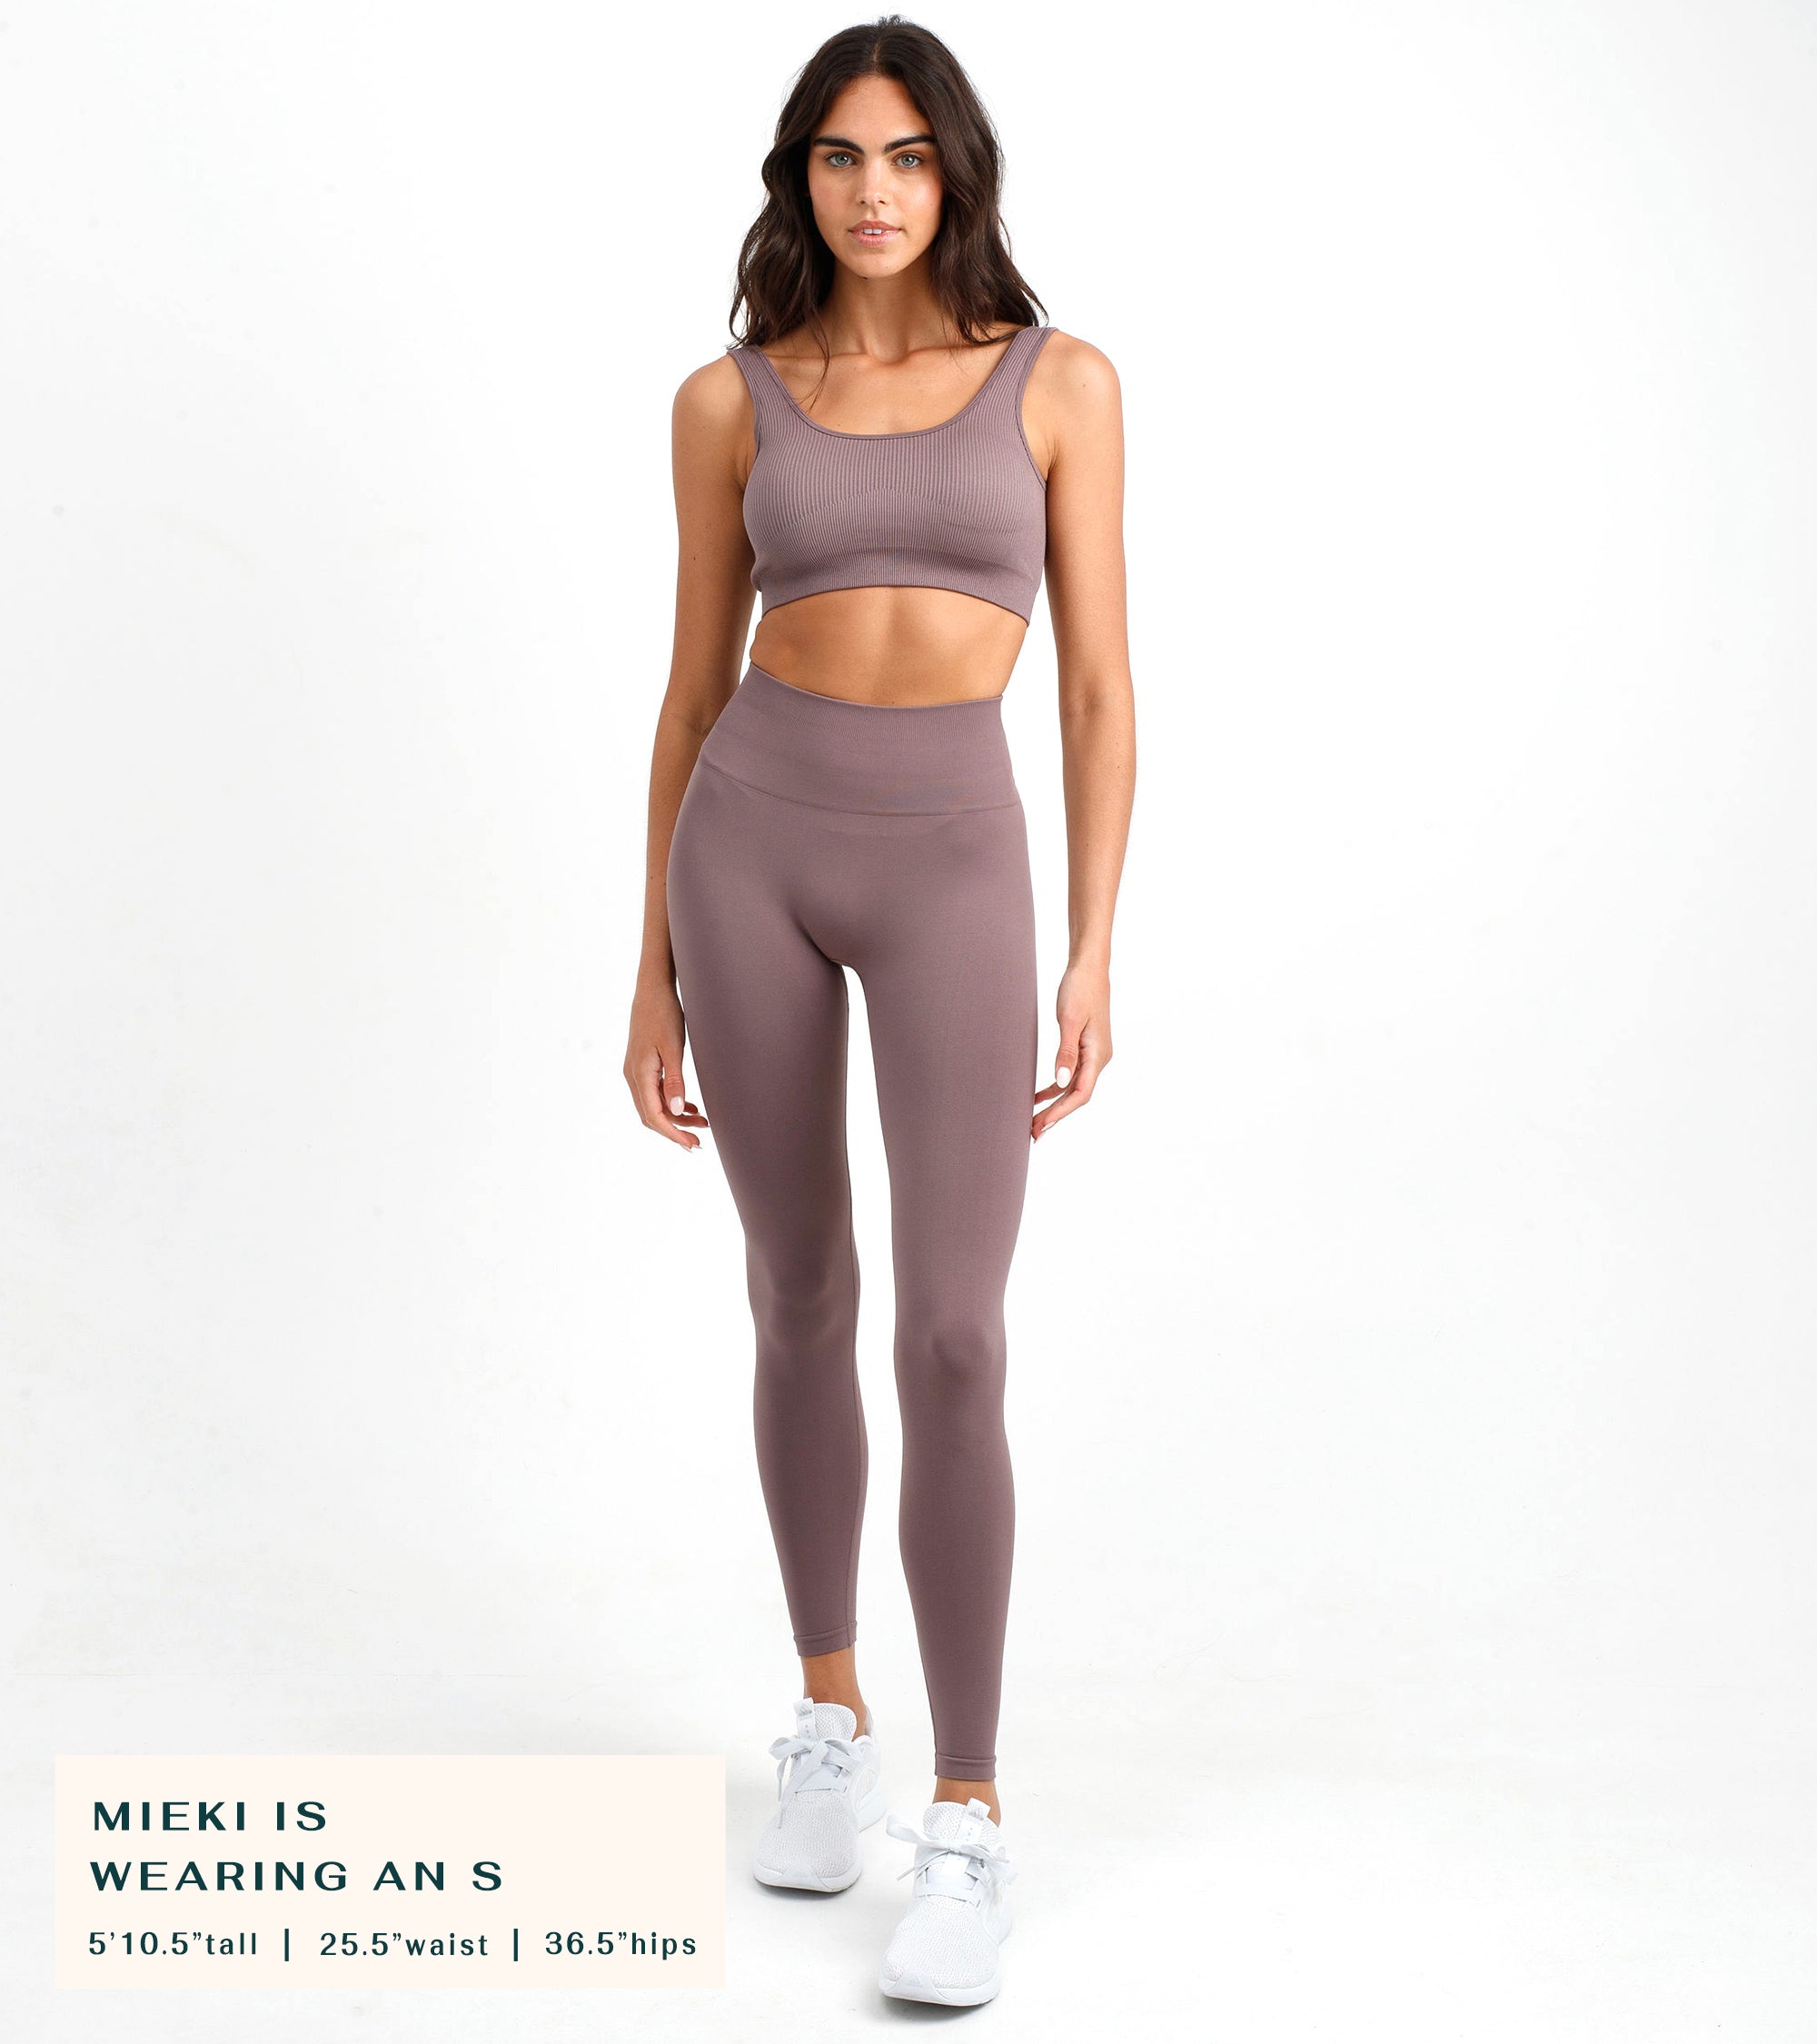 PAVOI ACTIVE Low Impact High-Waisted Pocket Leggings for Women